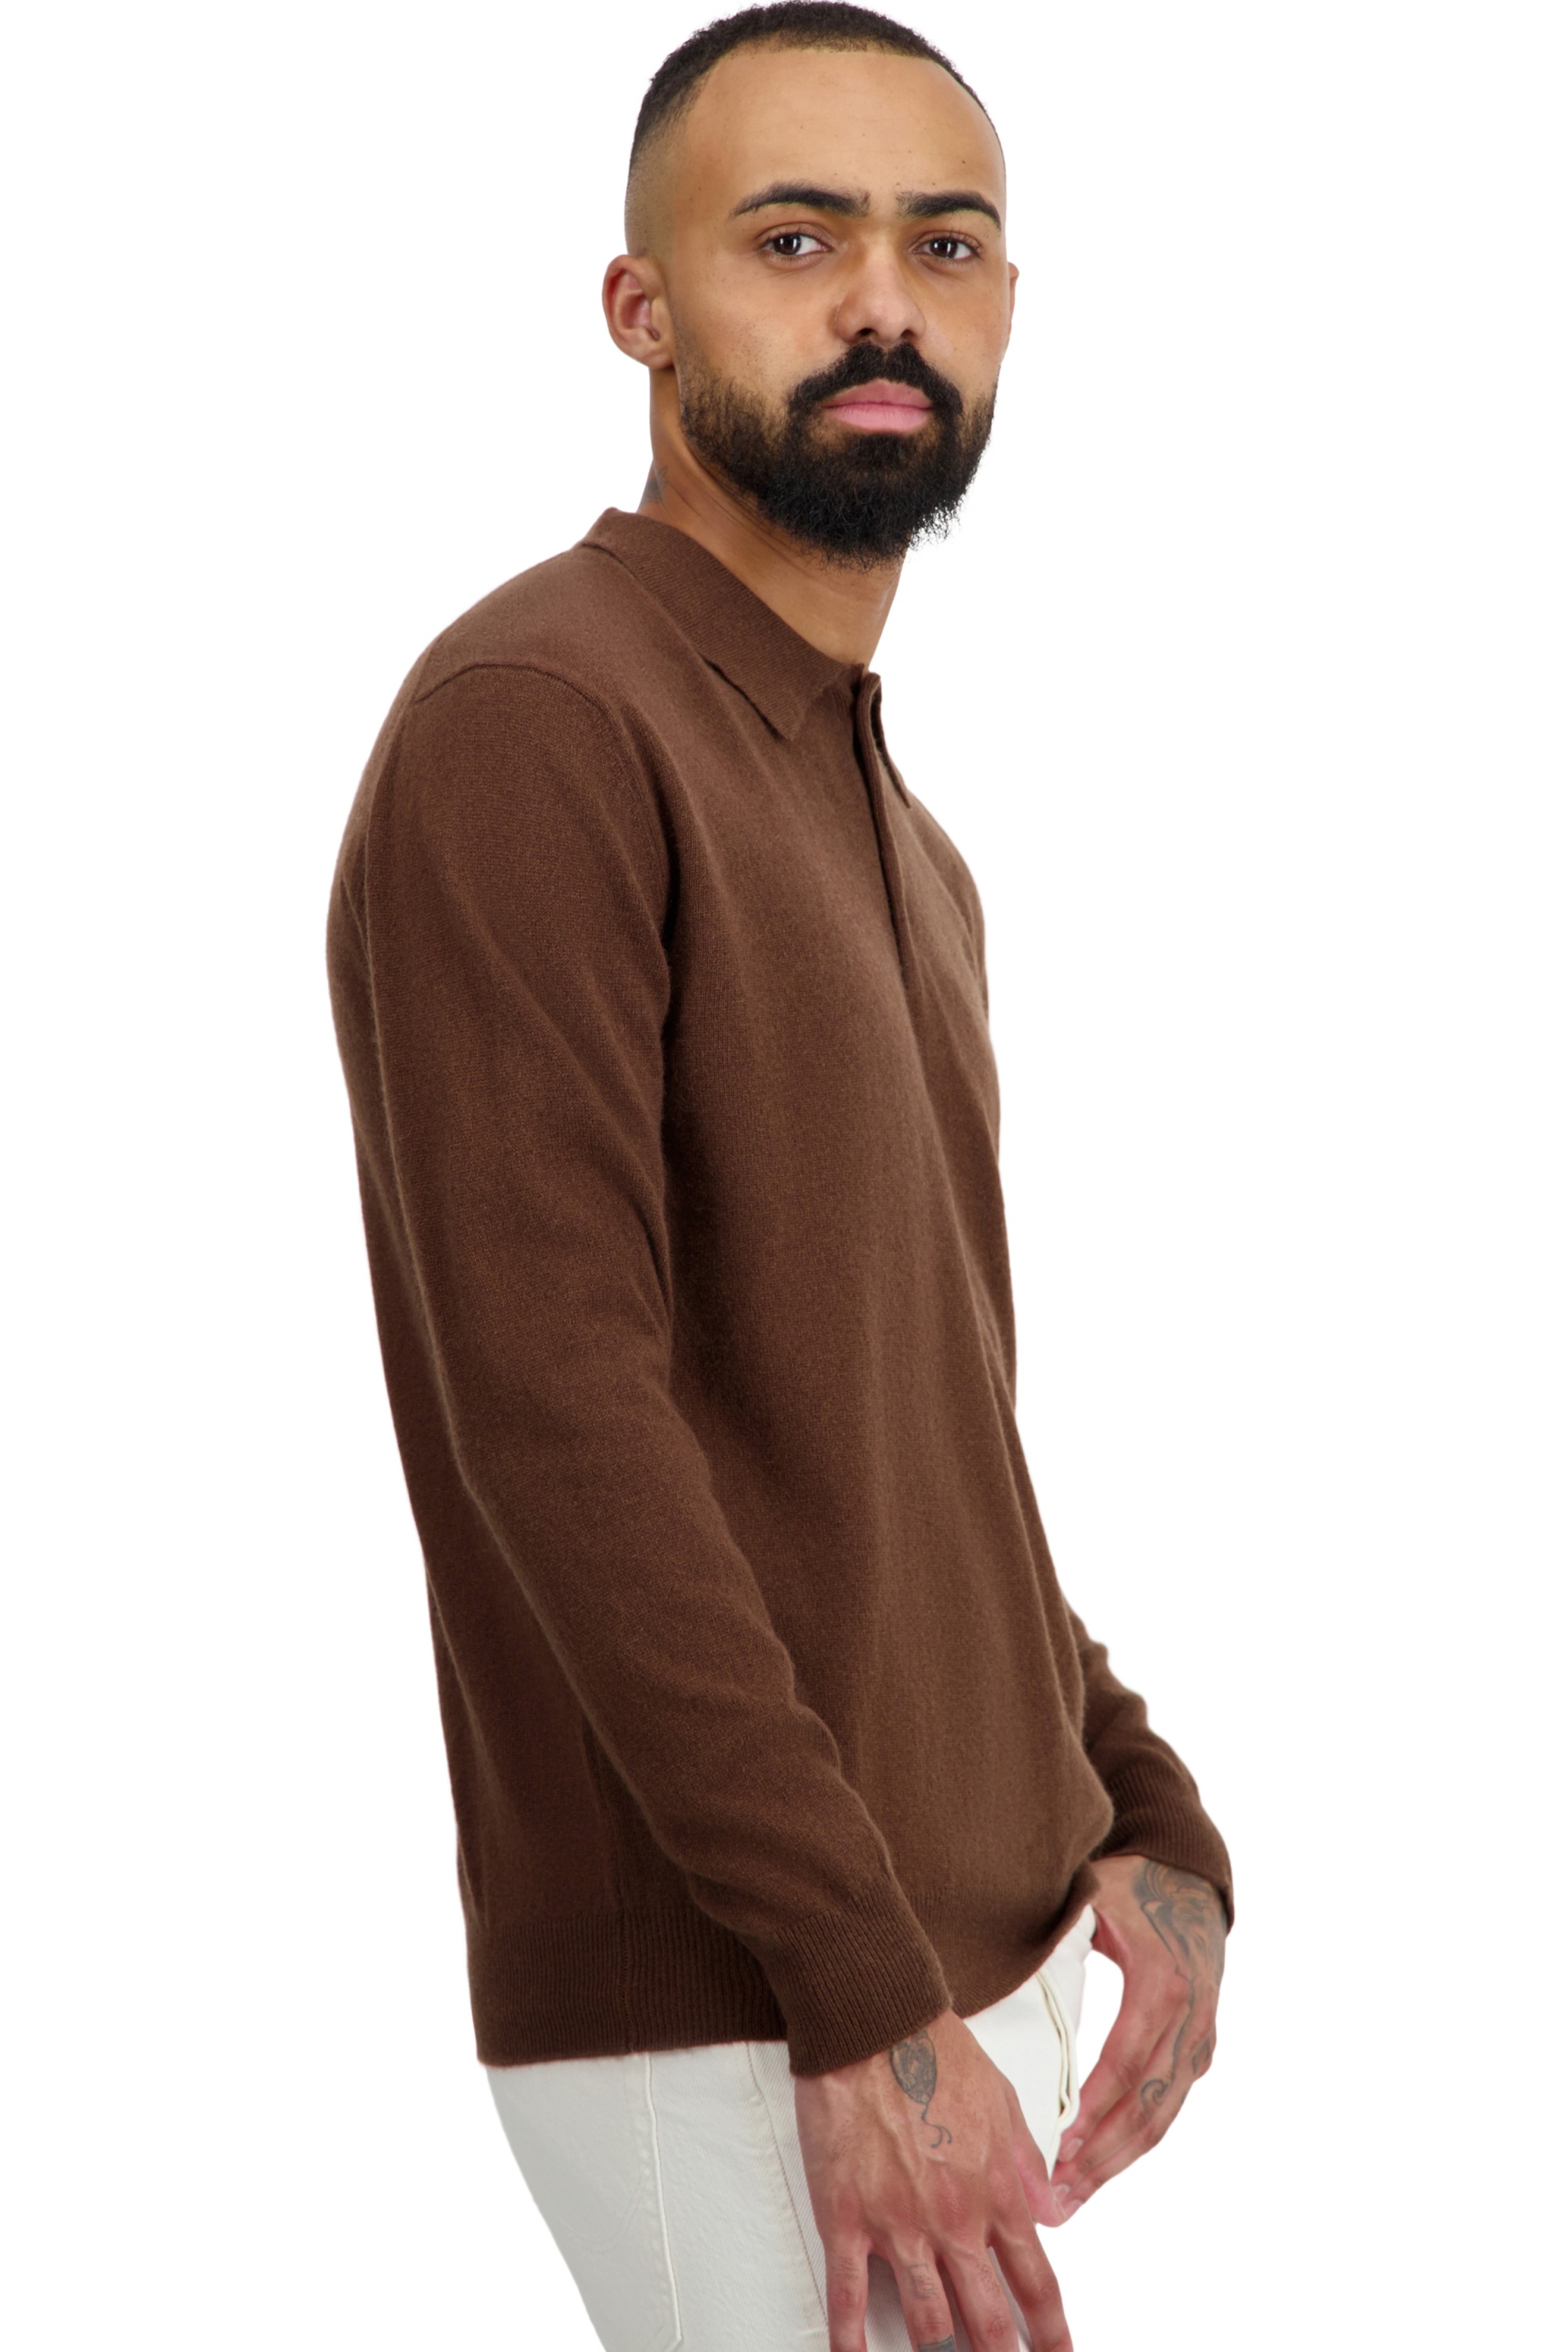 Cashmere men basic sweaters at low prices tarn first dark camel xl